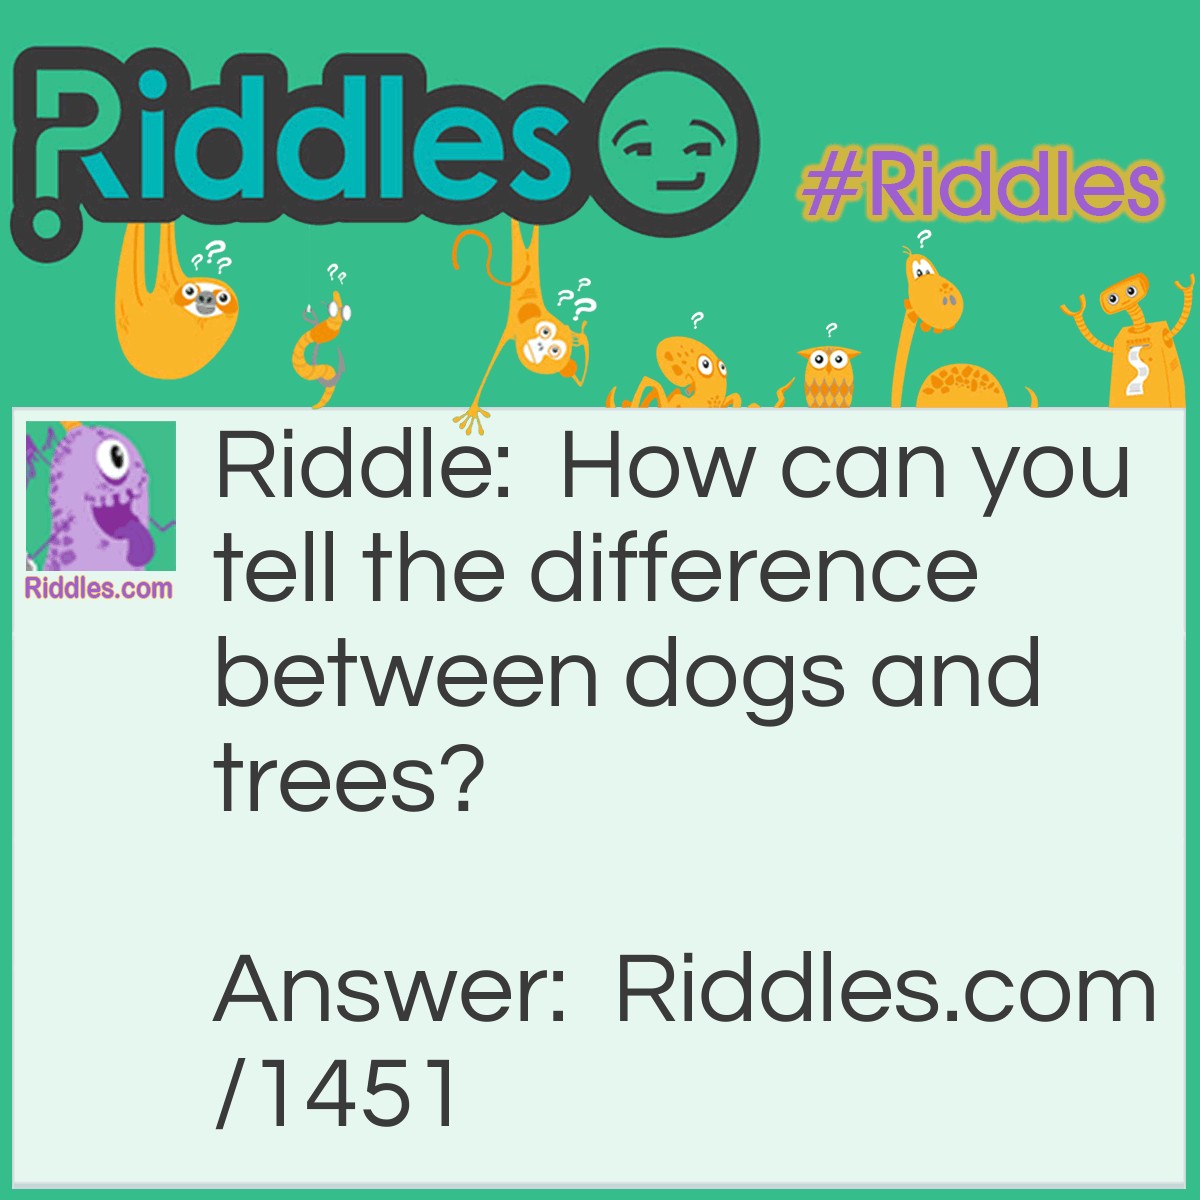 Riddle: How can you tell the difference between dogs and trees? Answer: By their bark.